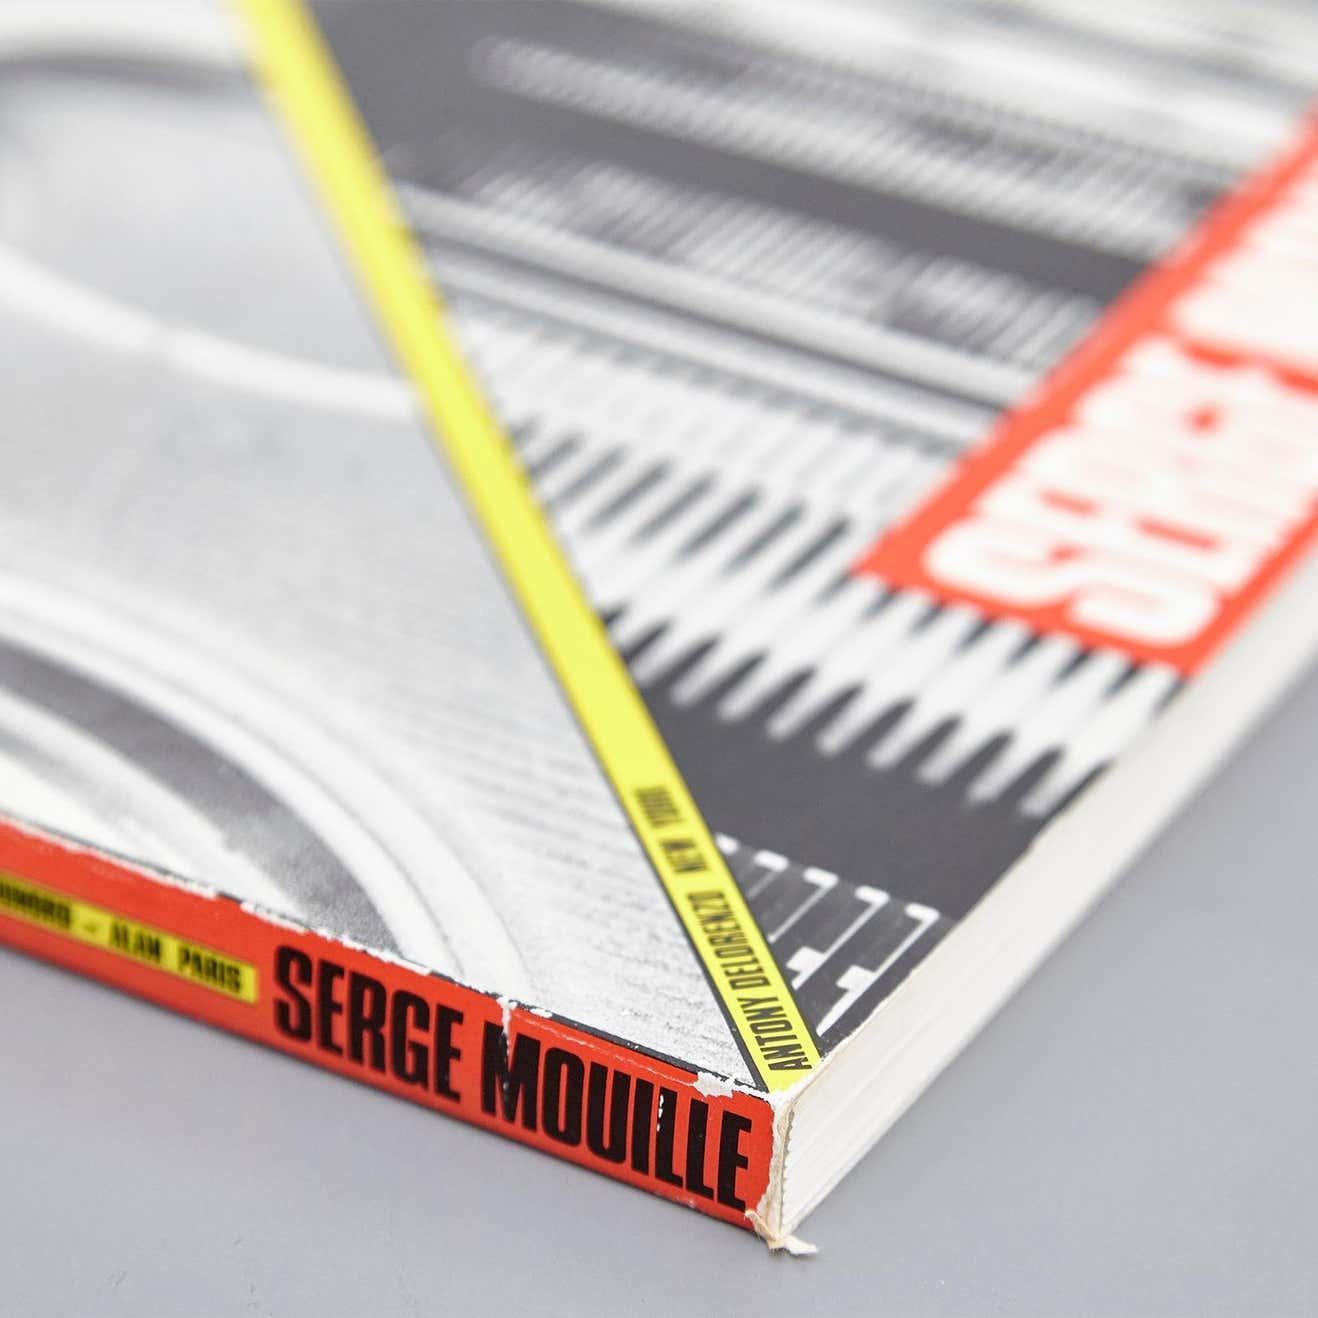 German Jean Prouvé Serge Mouille Mid-Century Modern Two Master Metal Workers Book For Sale